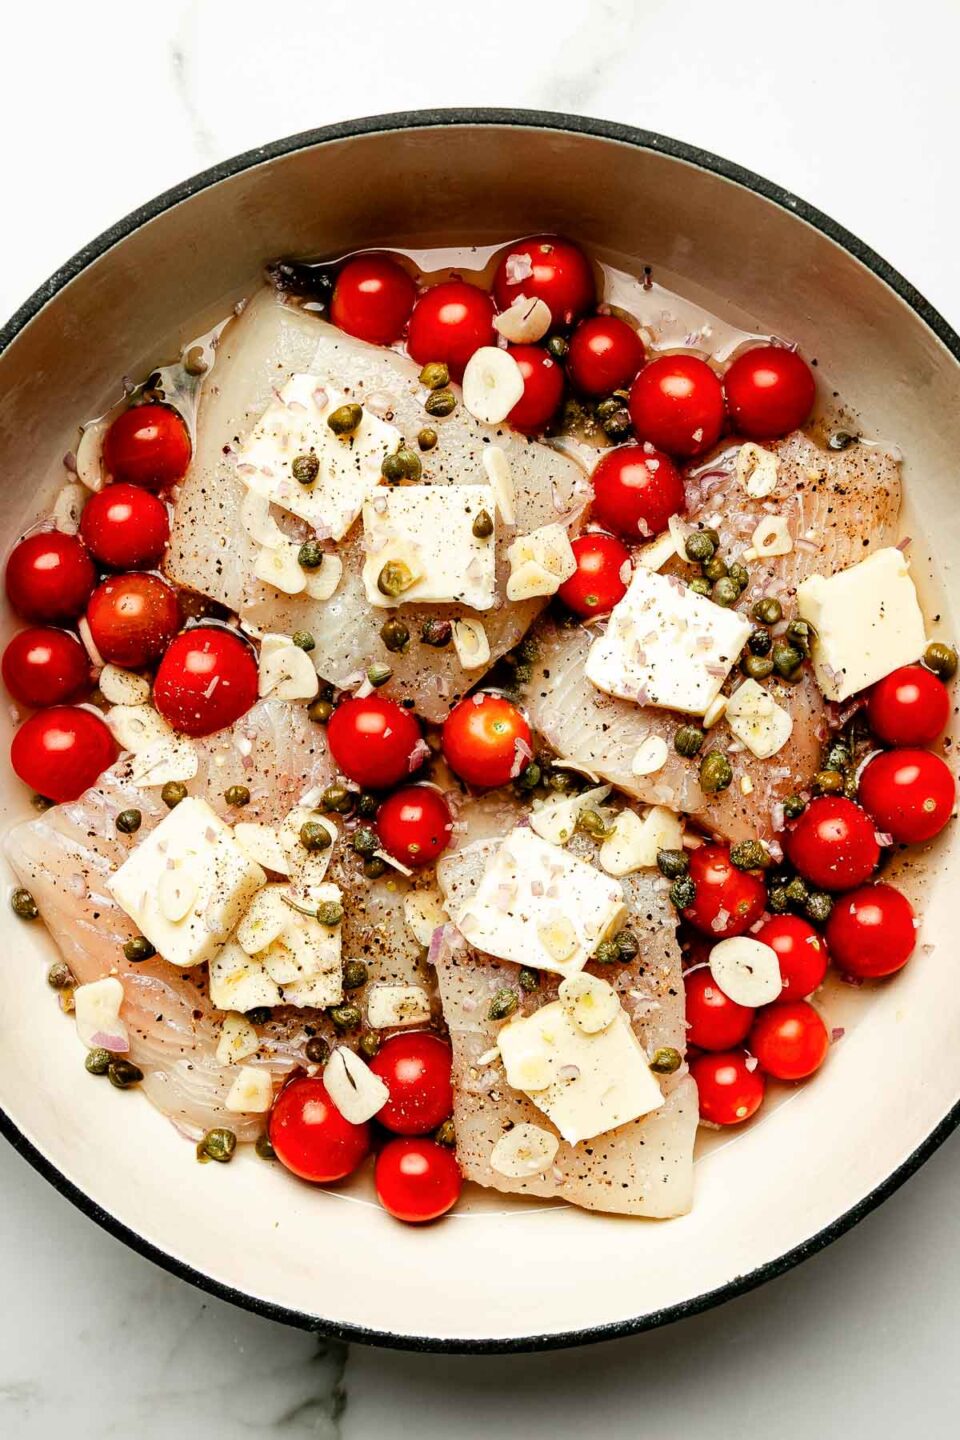 An overhead shot of uncooked ingredients in a skillet atop a white marbled surface: cod filets, pats of butter, cherry tomatoes, capers, garlic and shallots.